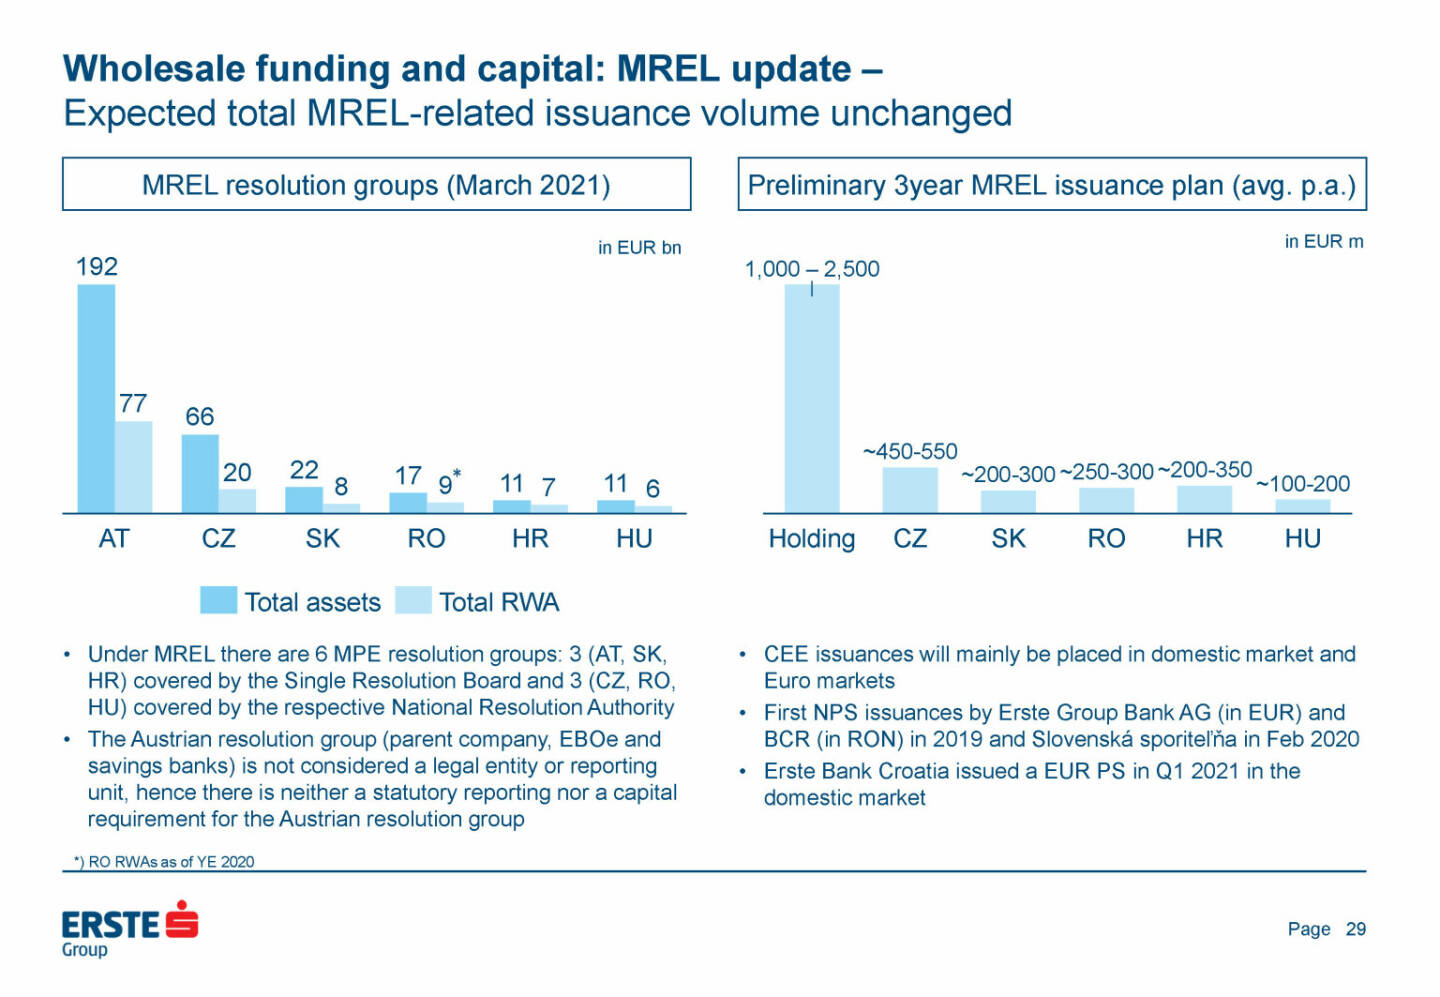 Erste Group - Wholesale funding and capital: MREL update